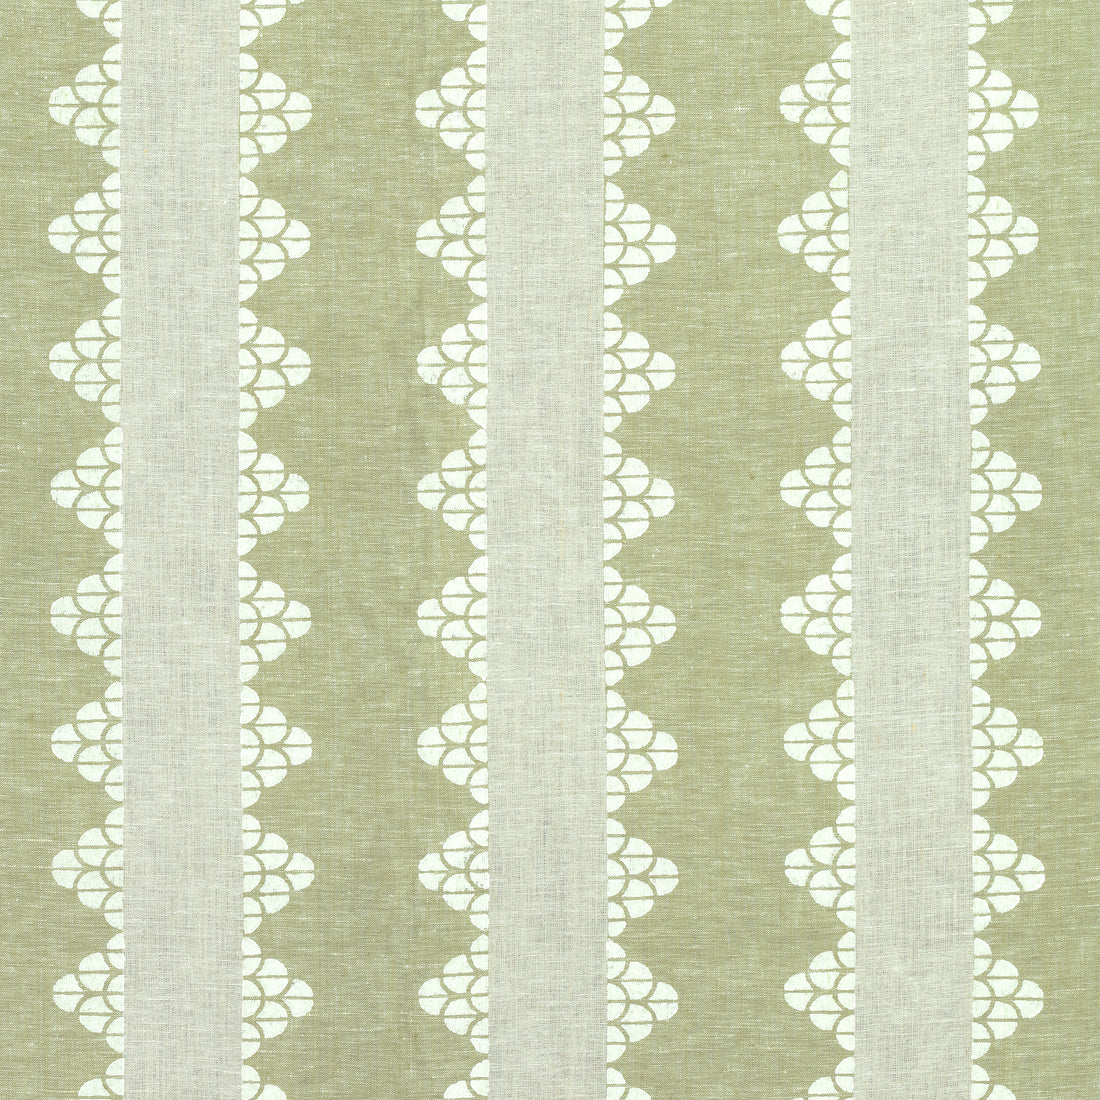 Dhara Stripe fabric in green color - pattern number F92937 - by Thibaut in the Paramount collection